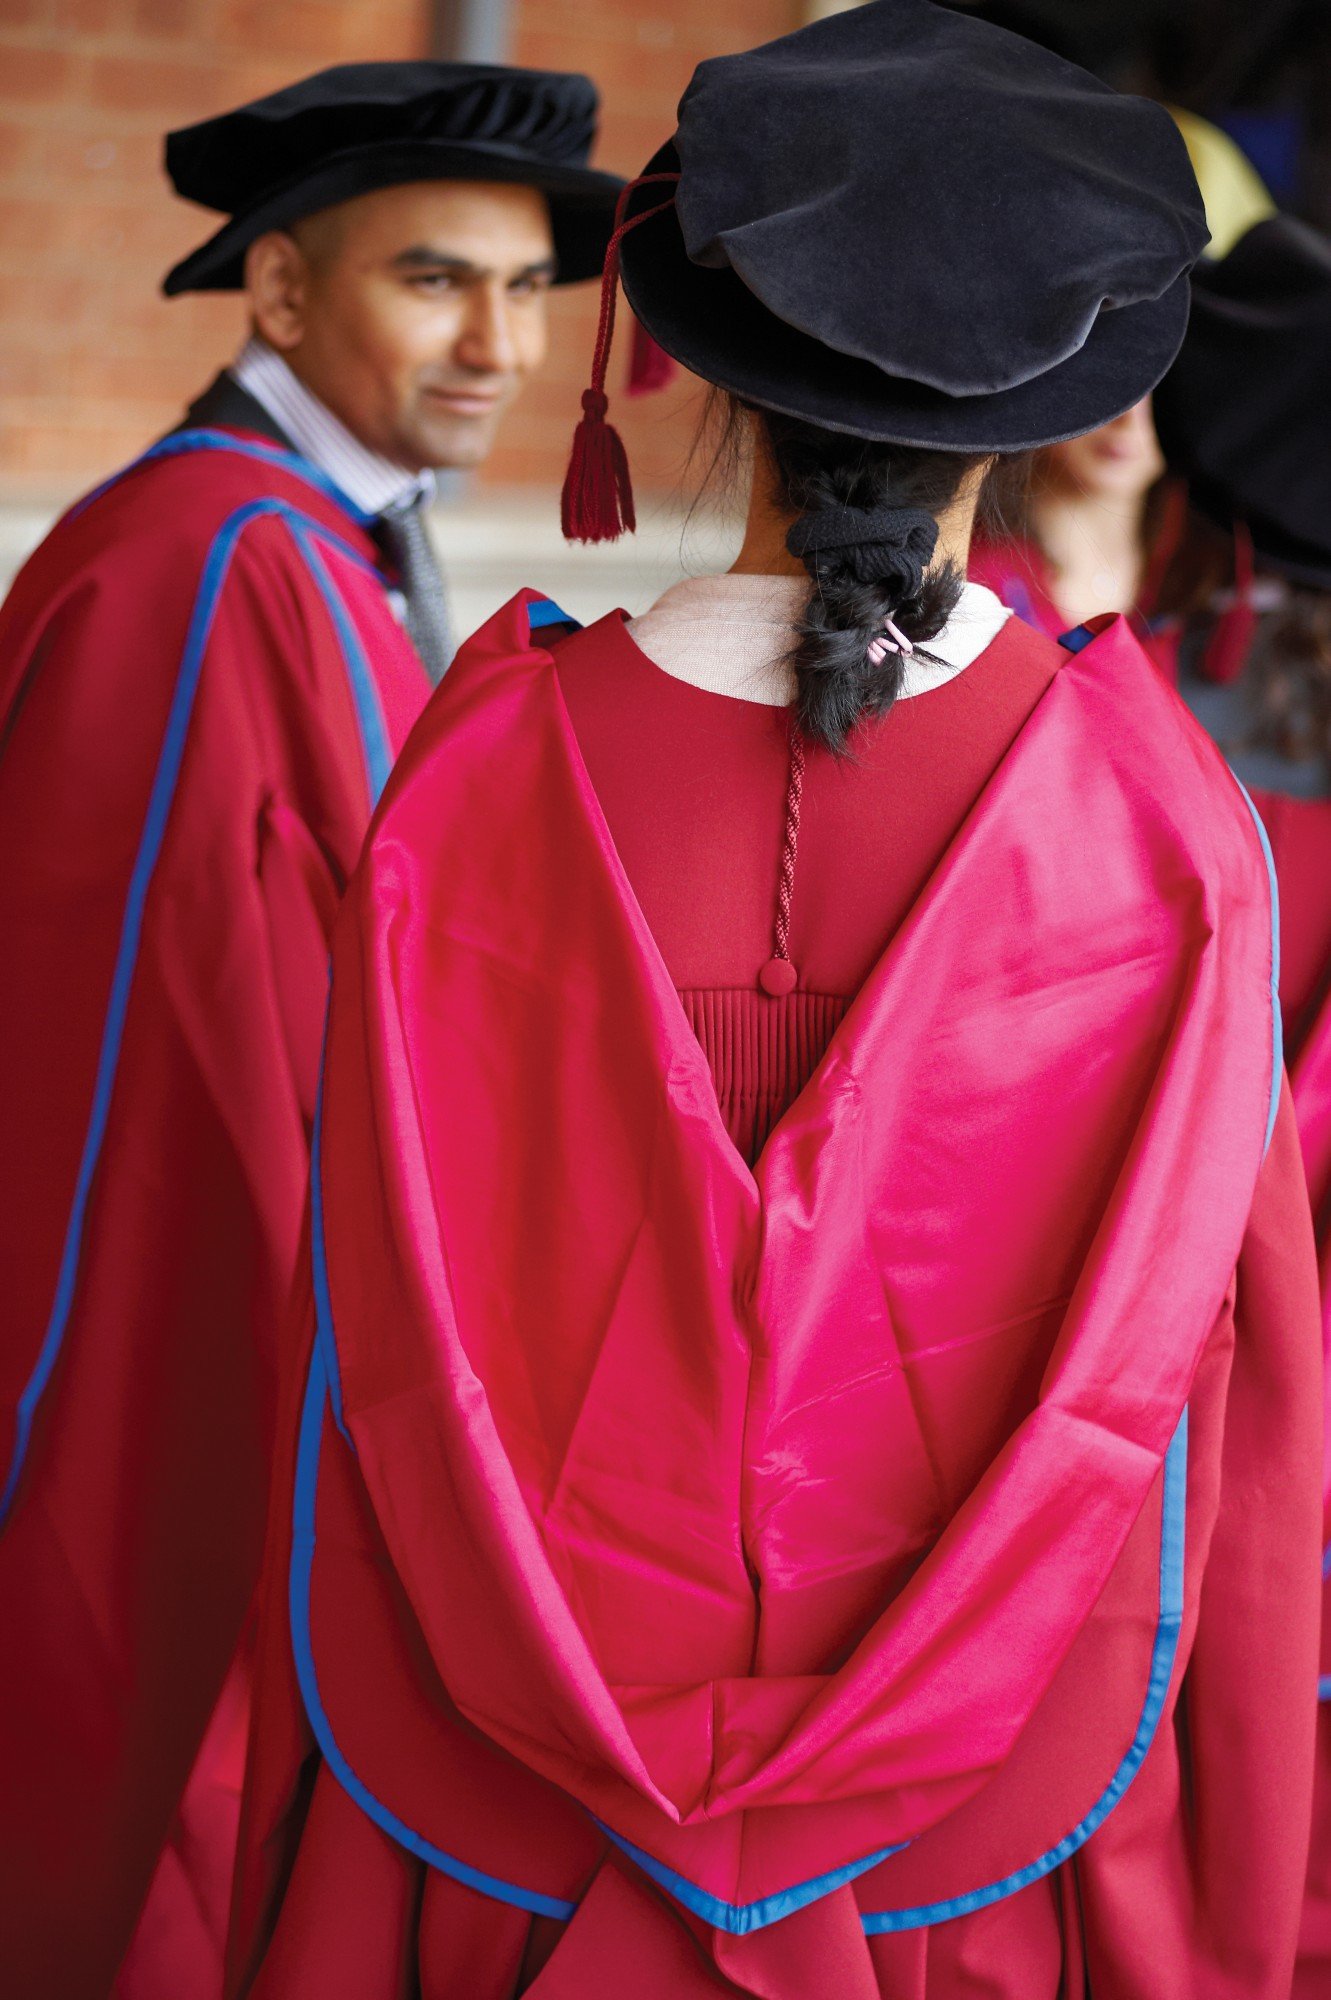 Postgraduates in red robes